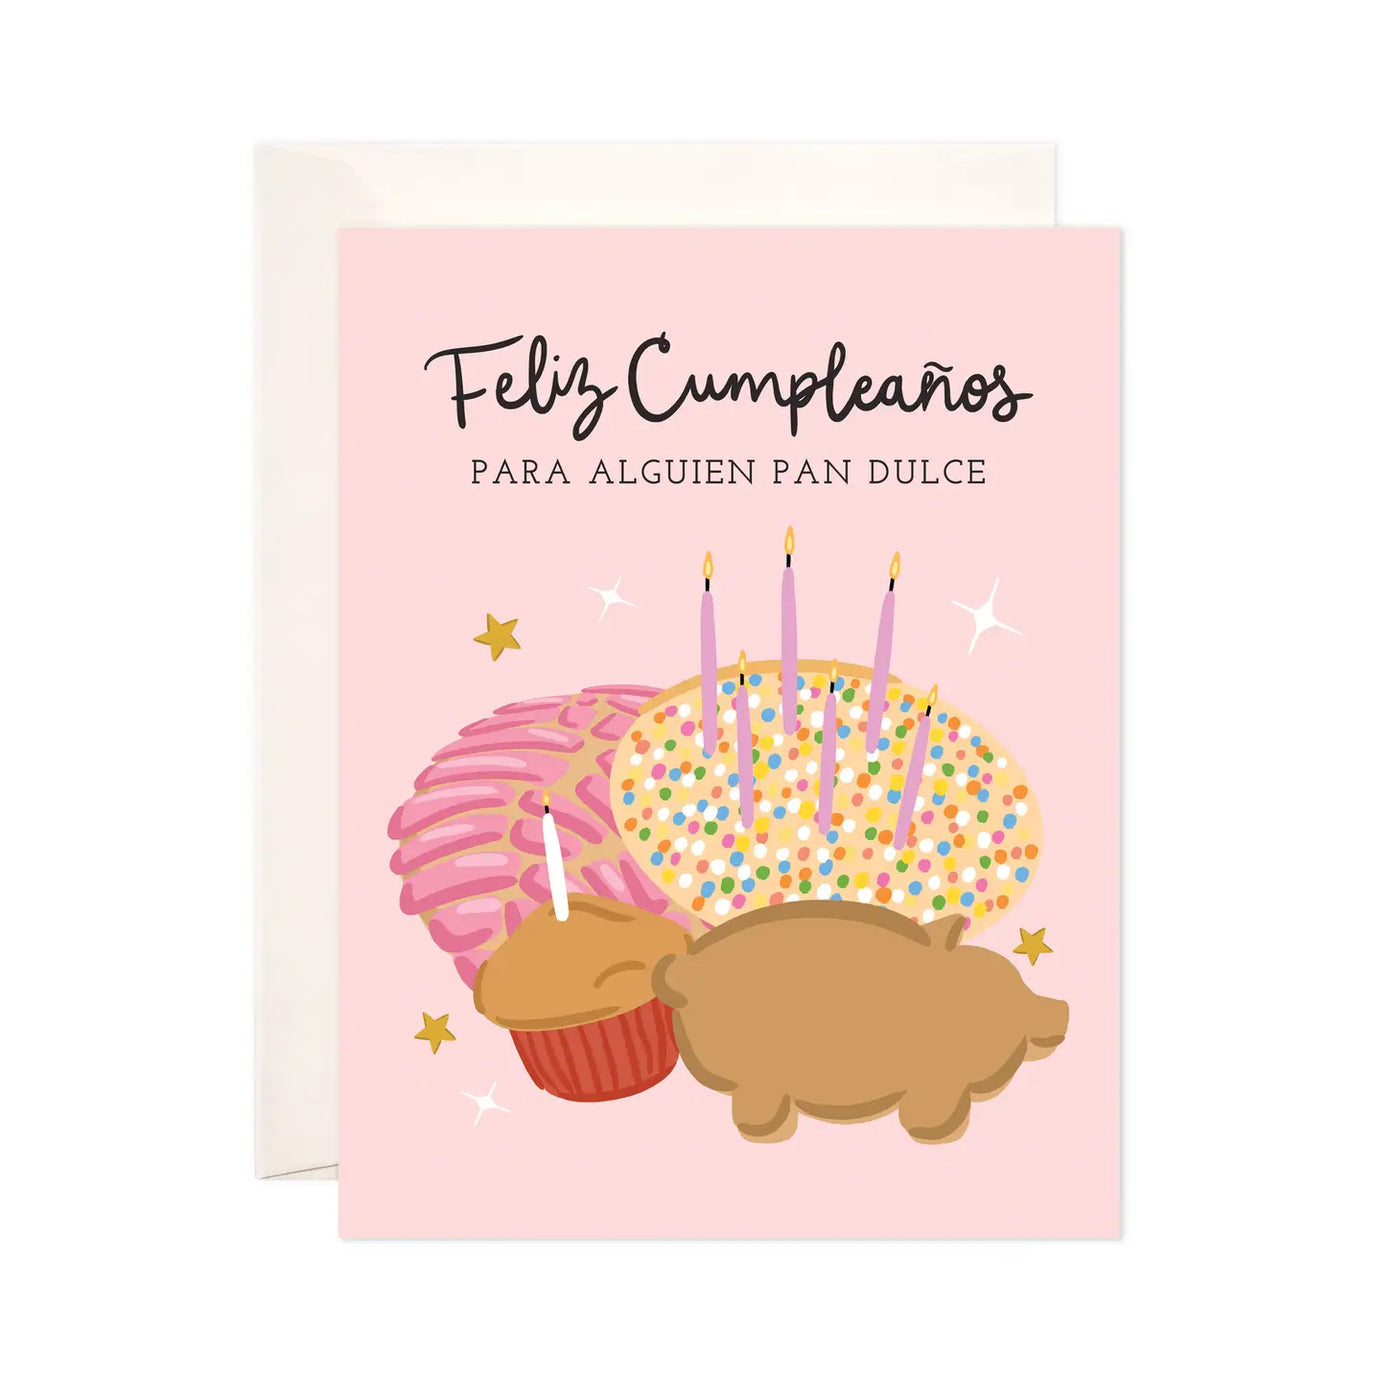 pink card with images of various Mexican pasteries and the phrase Feliz Cumpleanos para alguien pan Dulce